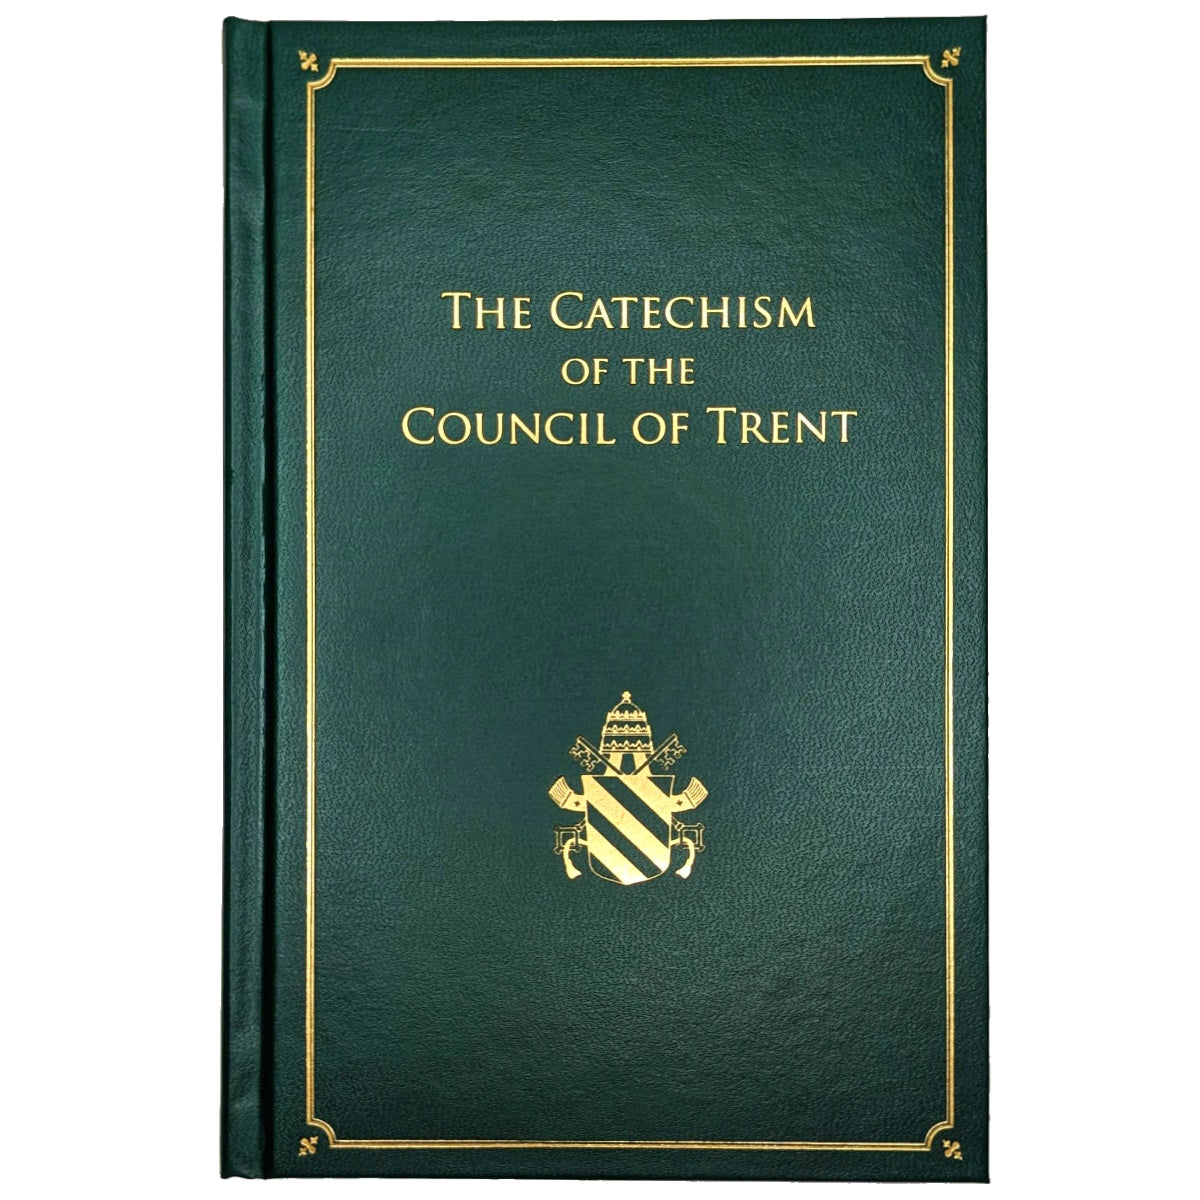 Catechism of the Council of Trent (Hardcover)